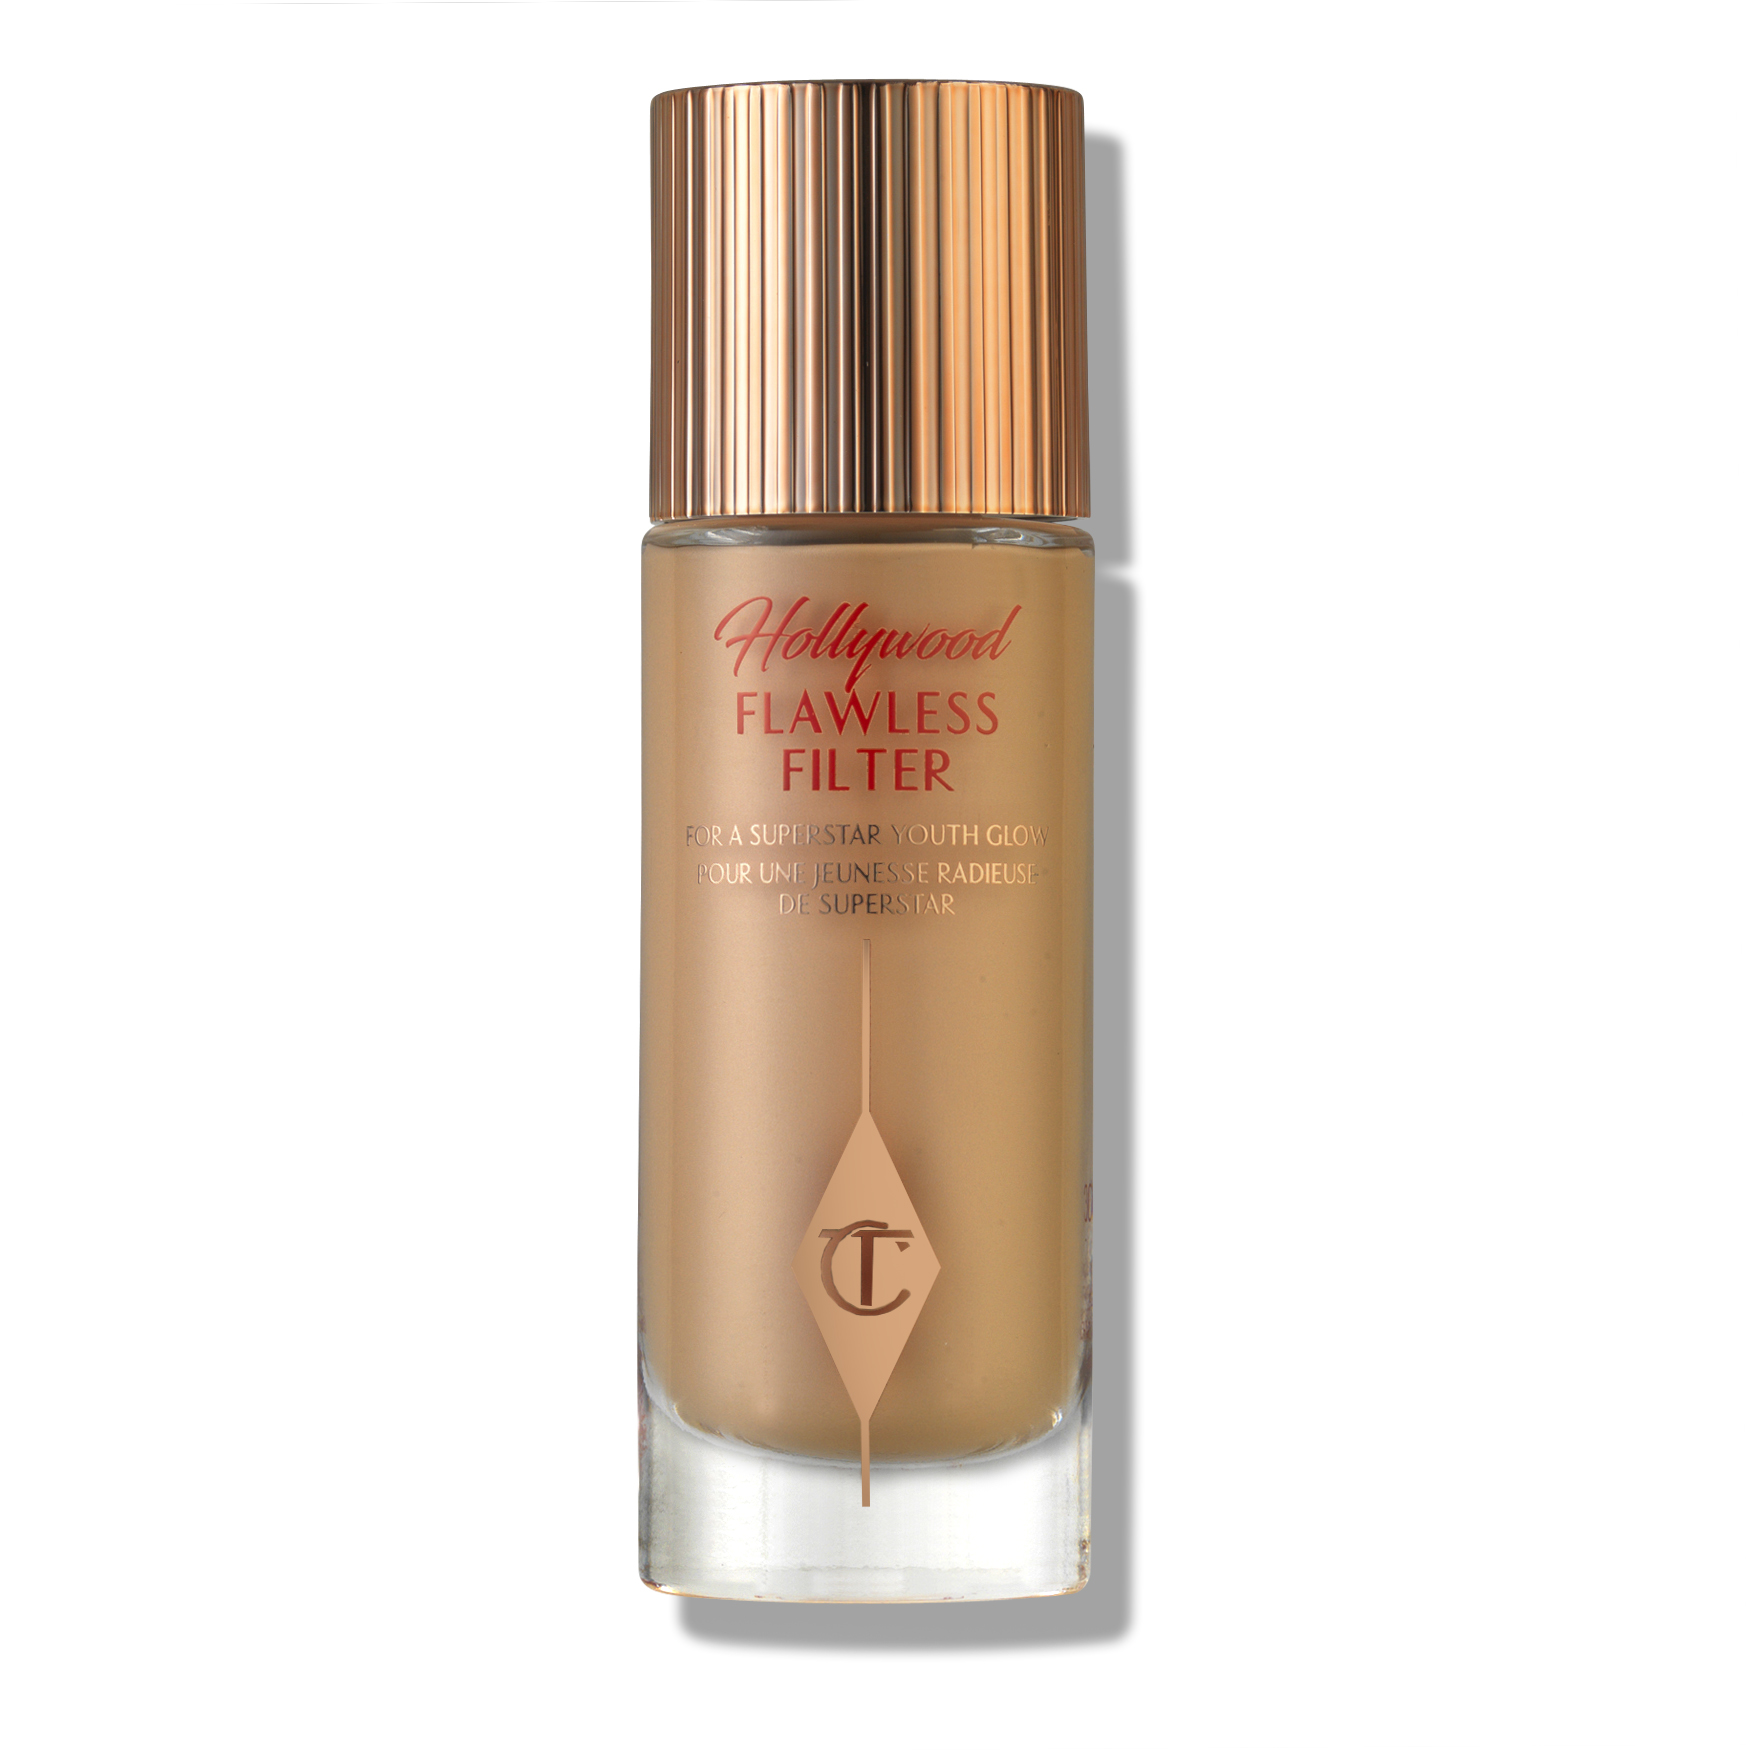 Charlotte Tilbury | Hollywood Flawless Filter | Space NK | Space NK